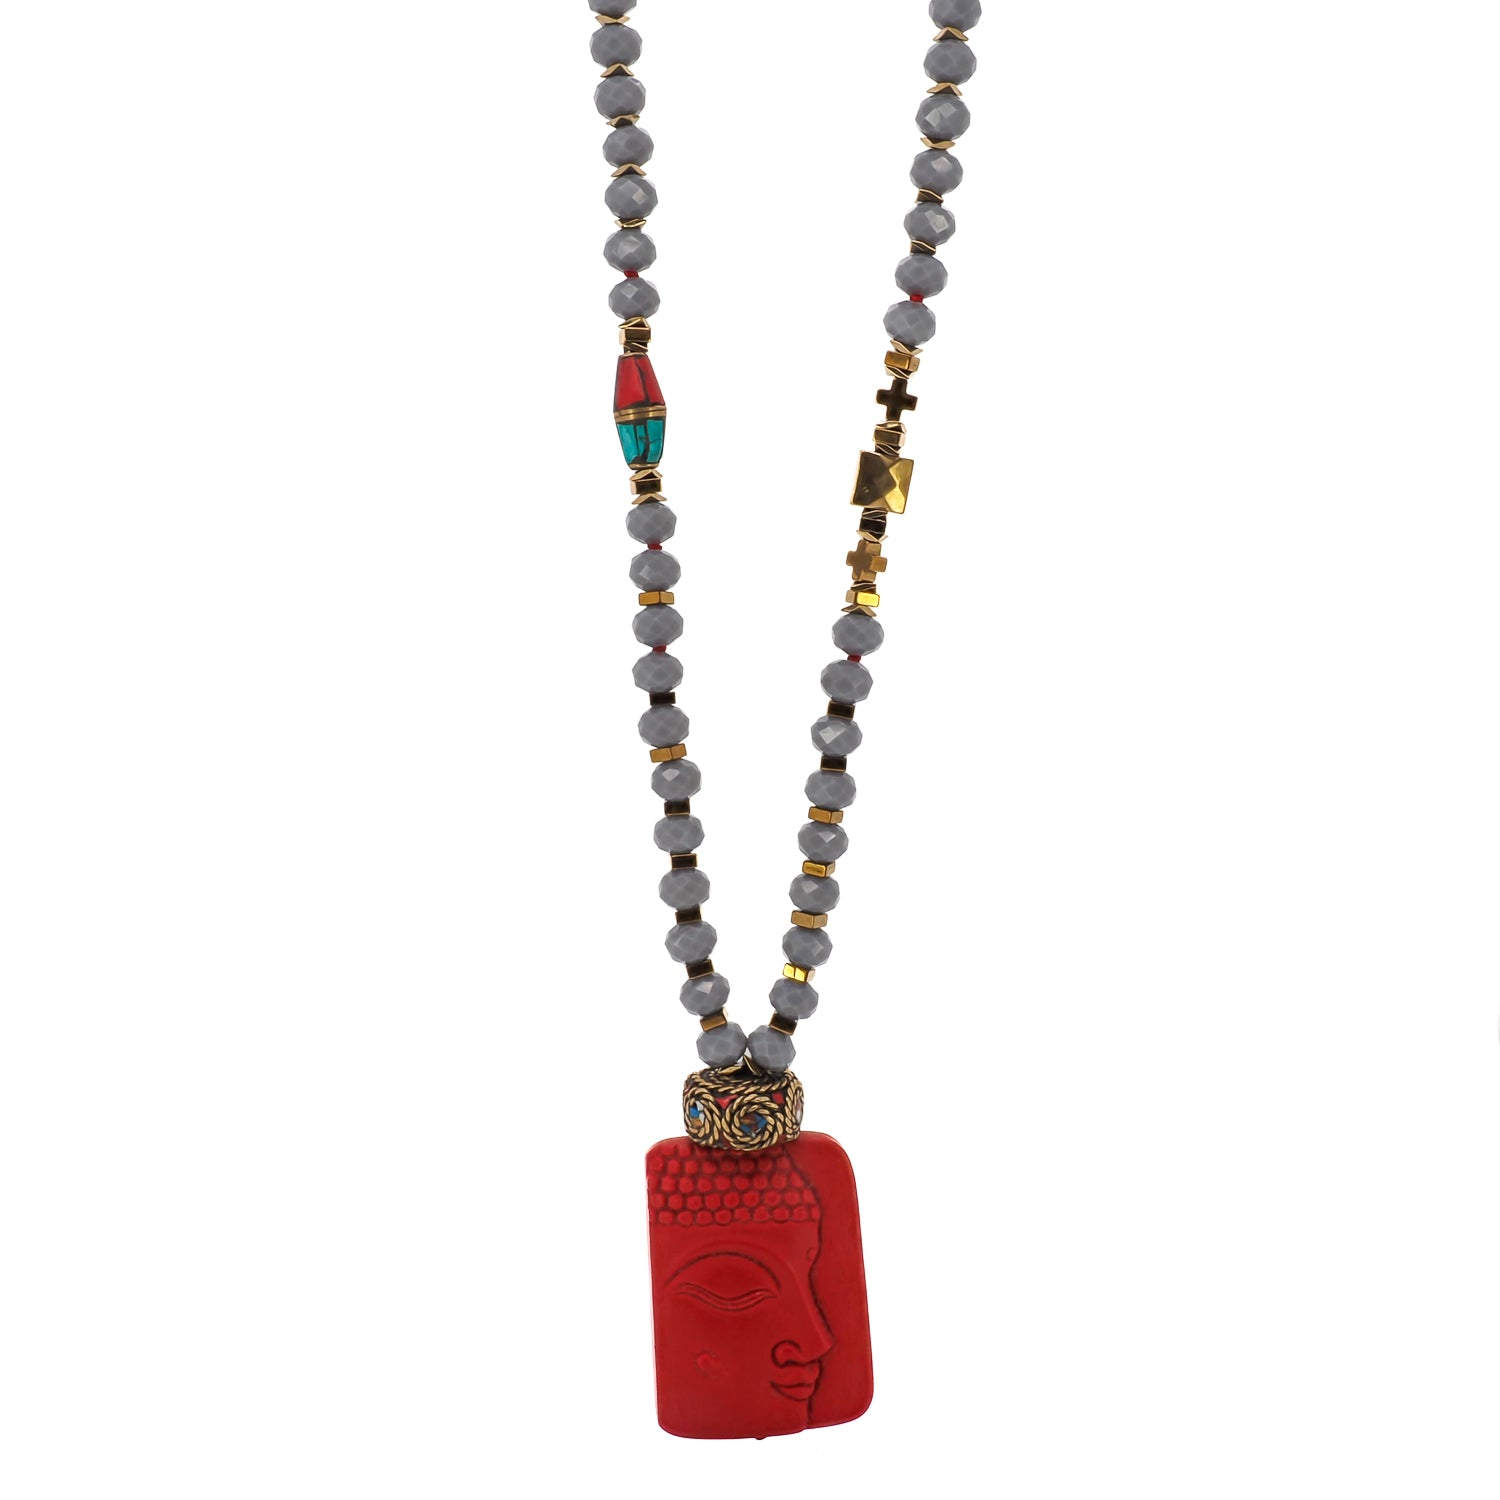 Rustic Red Rope Necklace with Nepal-Hand-Carved Buddha